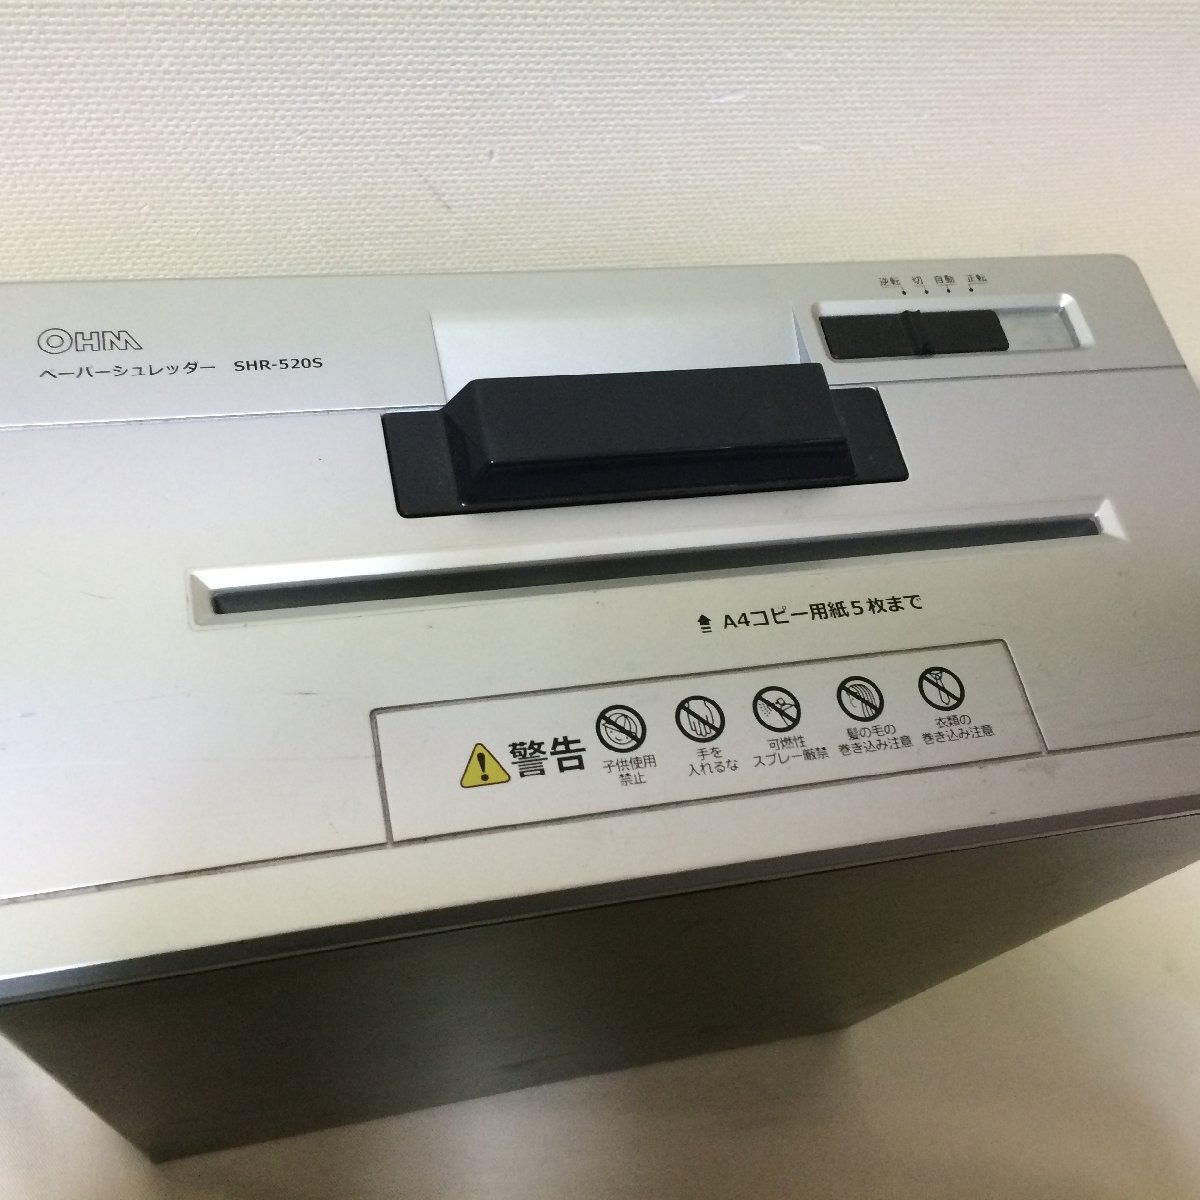 U639 OHM paper shredder SHR-520S A4 size 5 sheets till ohm electro- machine [ including in a package ×]